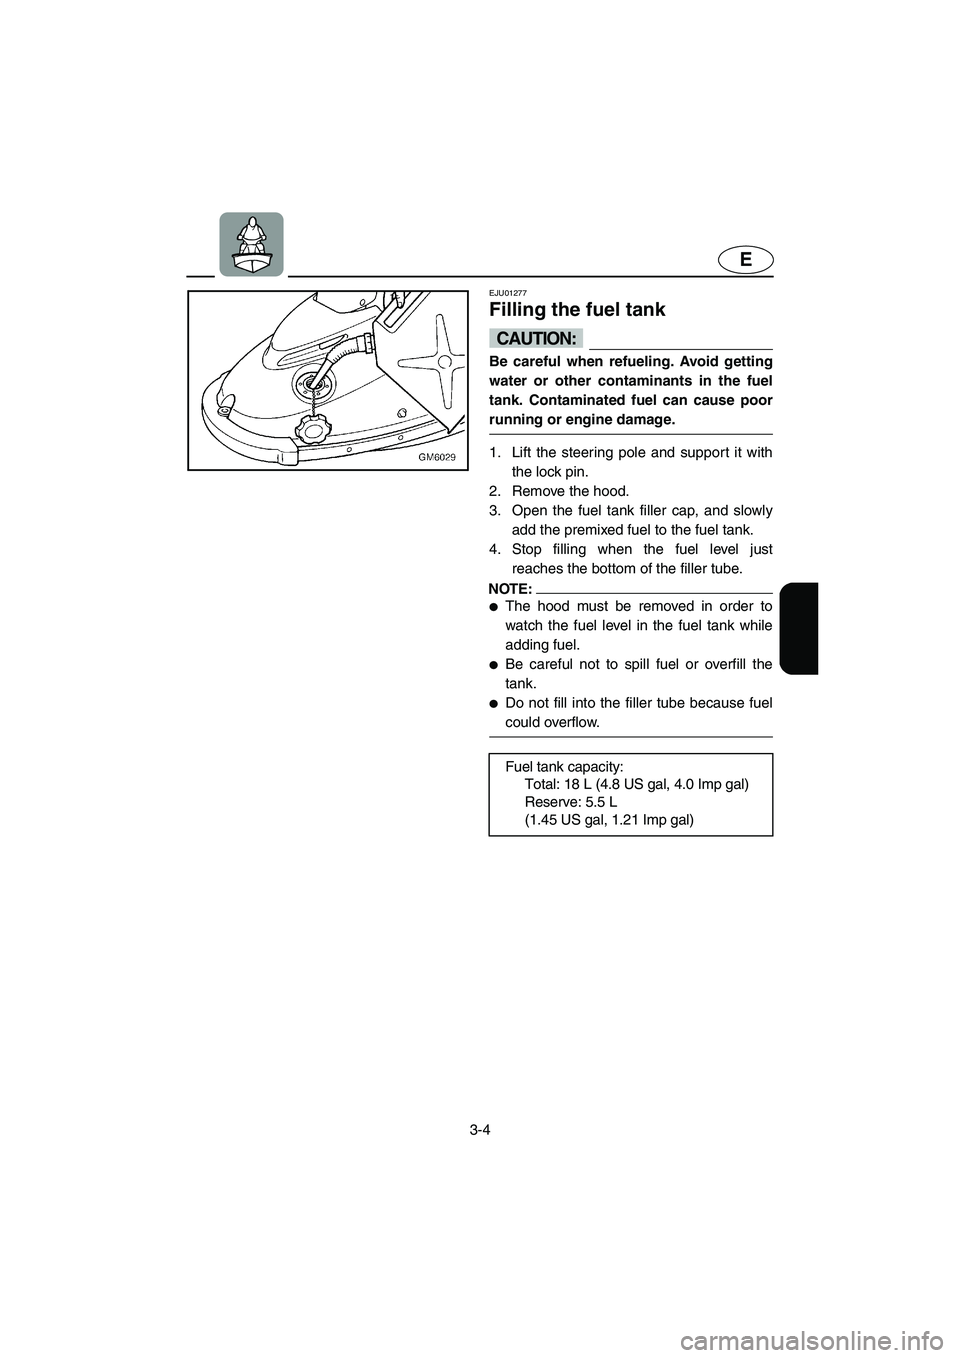 YAMAHA SUPERJET 2002  Owners Manual 3-4
E
EJU01277 
Filling the fuel tank  
CAUTION:@ Be careful when refueling. Avoid getting
water or other contaminants in the fuel
tank. Contaminated fuel can cause poor
running or engine damage. 
@ 
